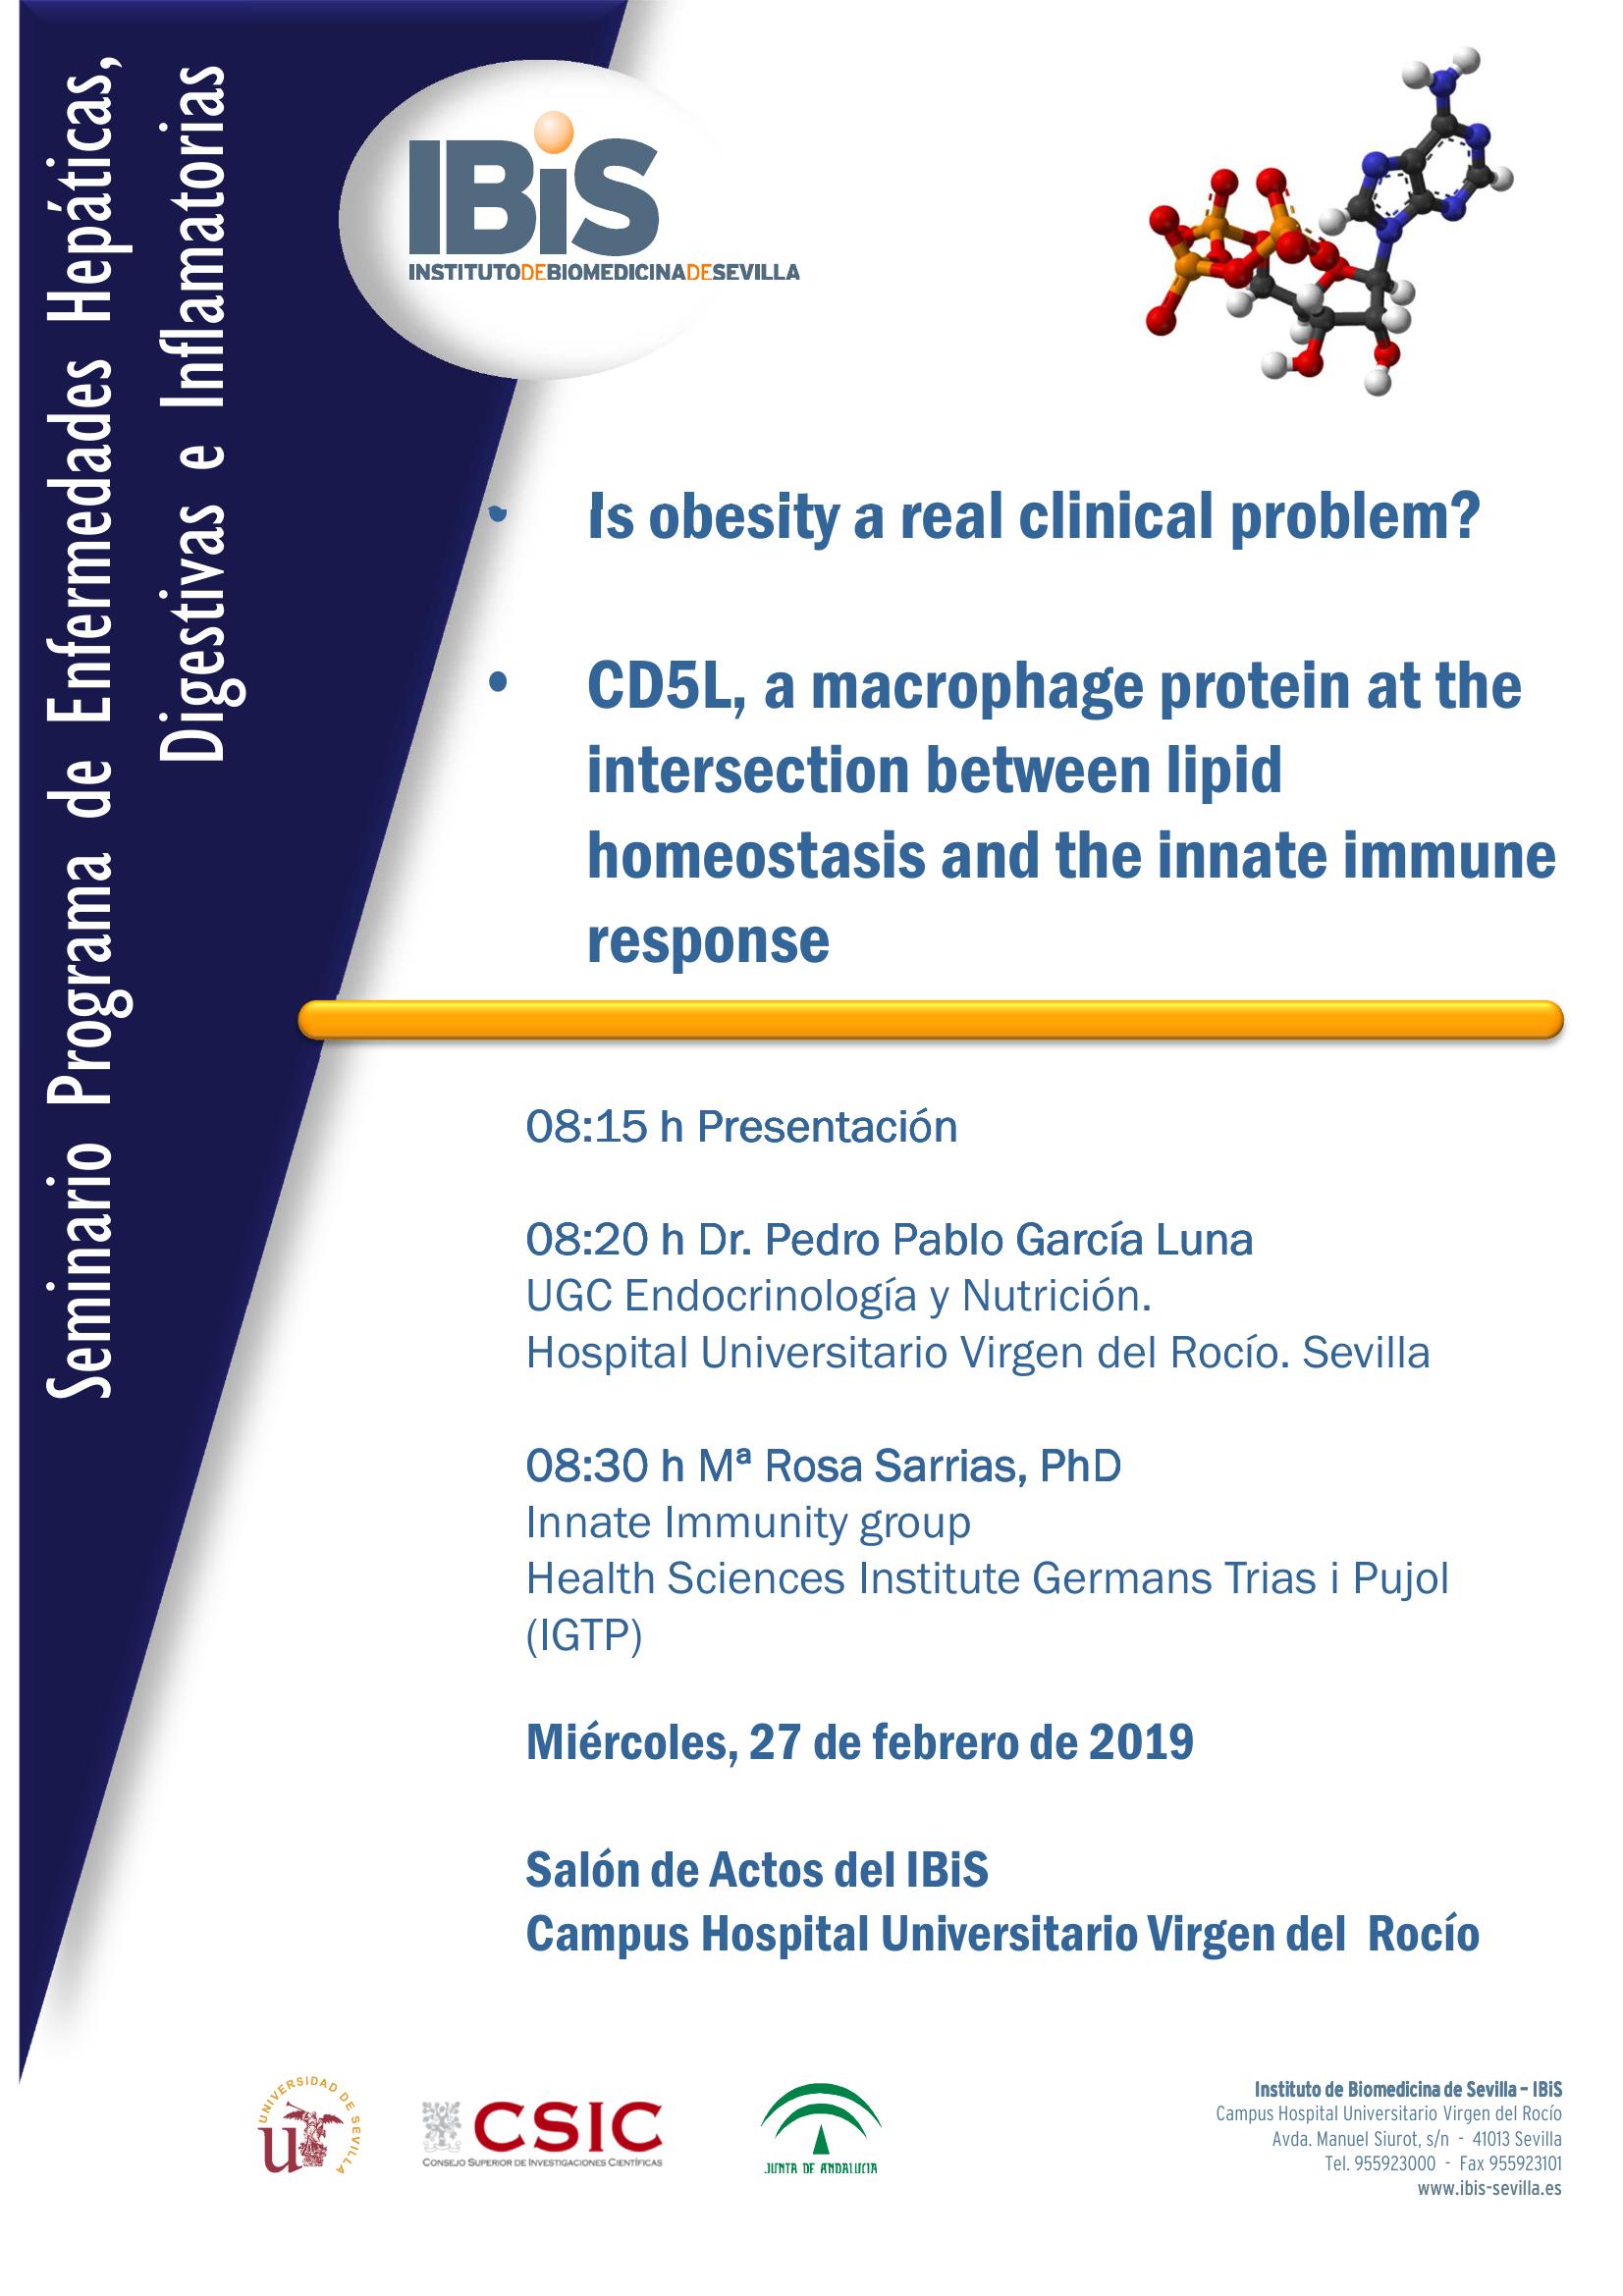 Poster: CD5L, a macrophage protein at the intersection between lipid homeostasis and the innate immune response